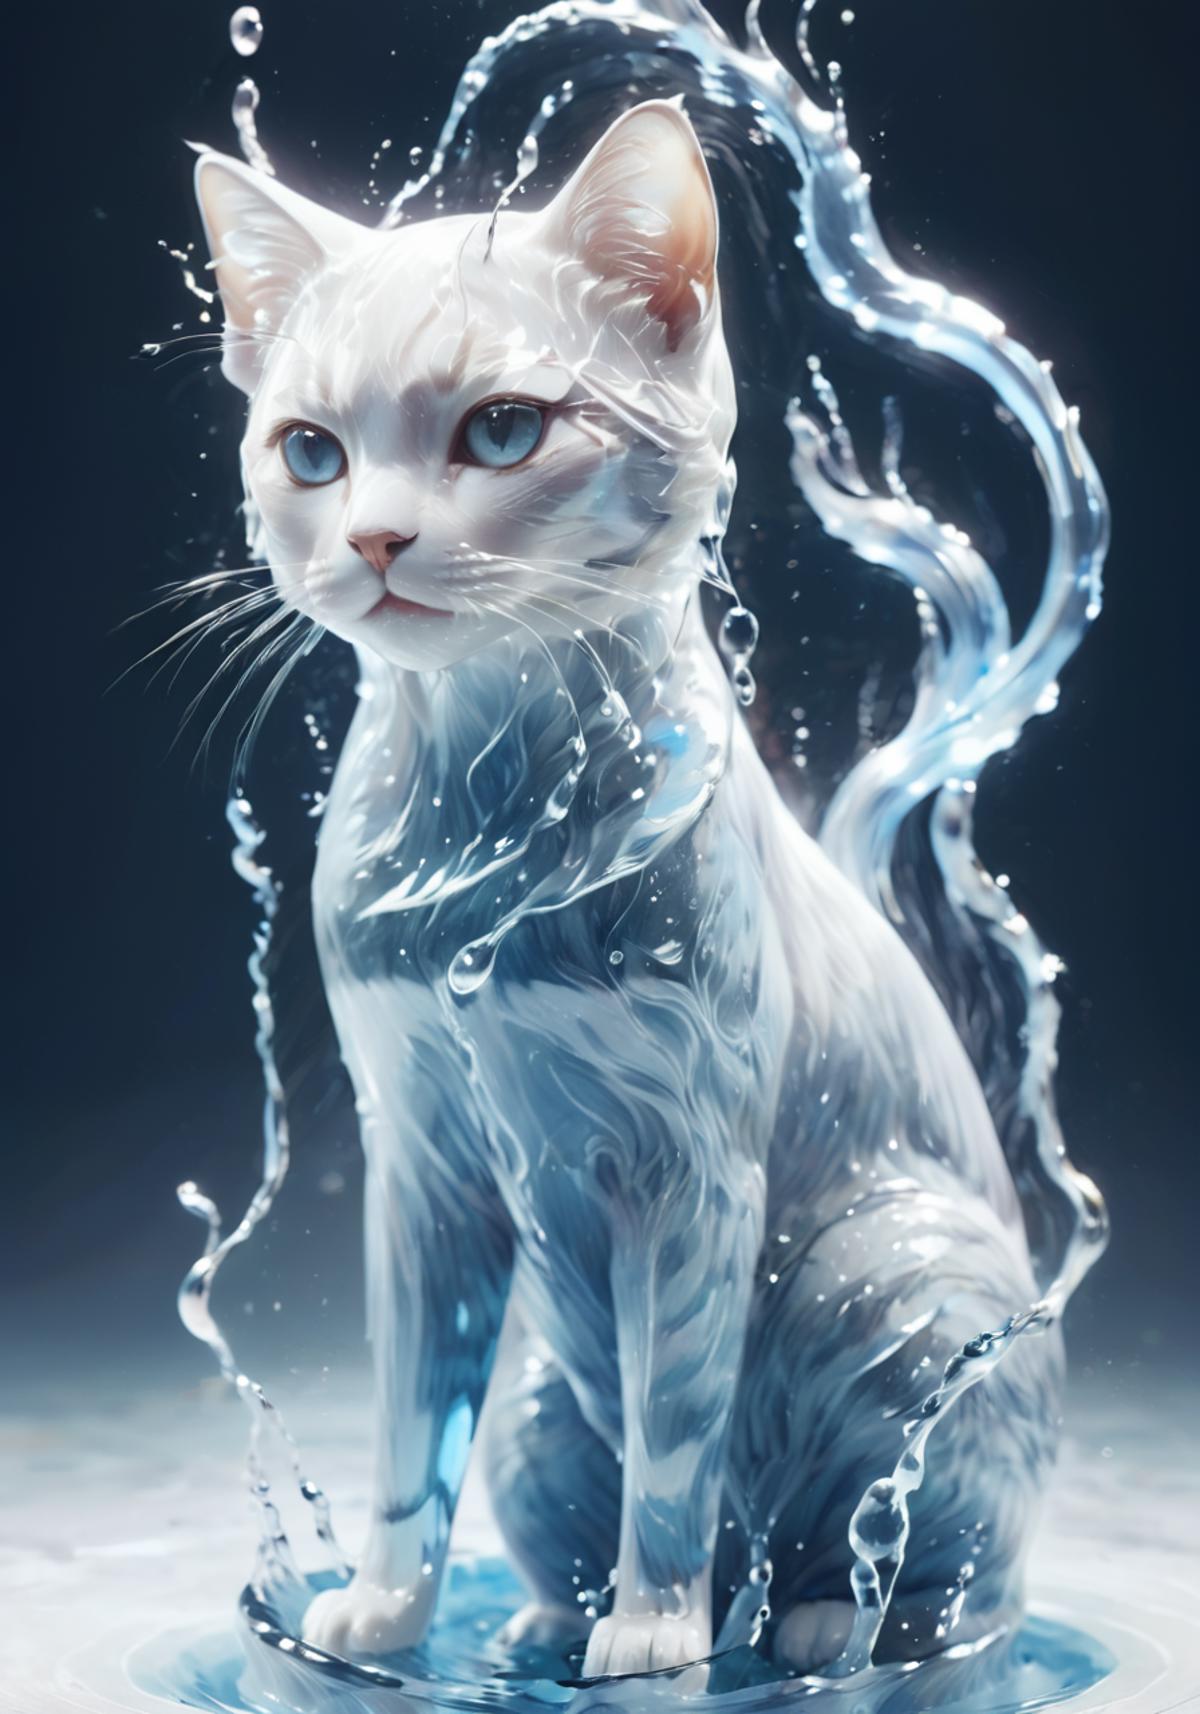 White cat standing in water with blue eyes and a blue tail.